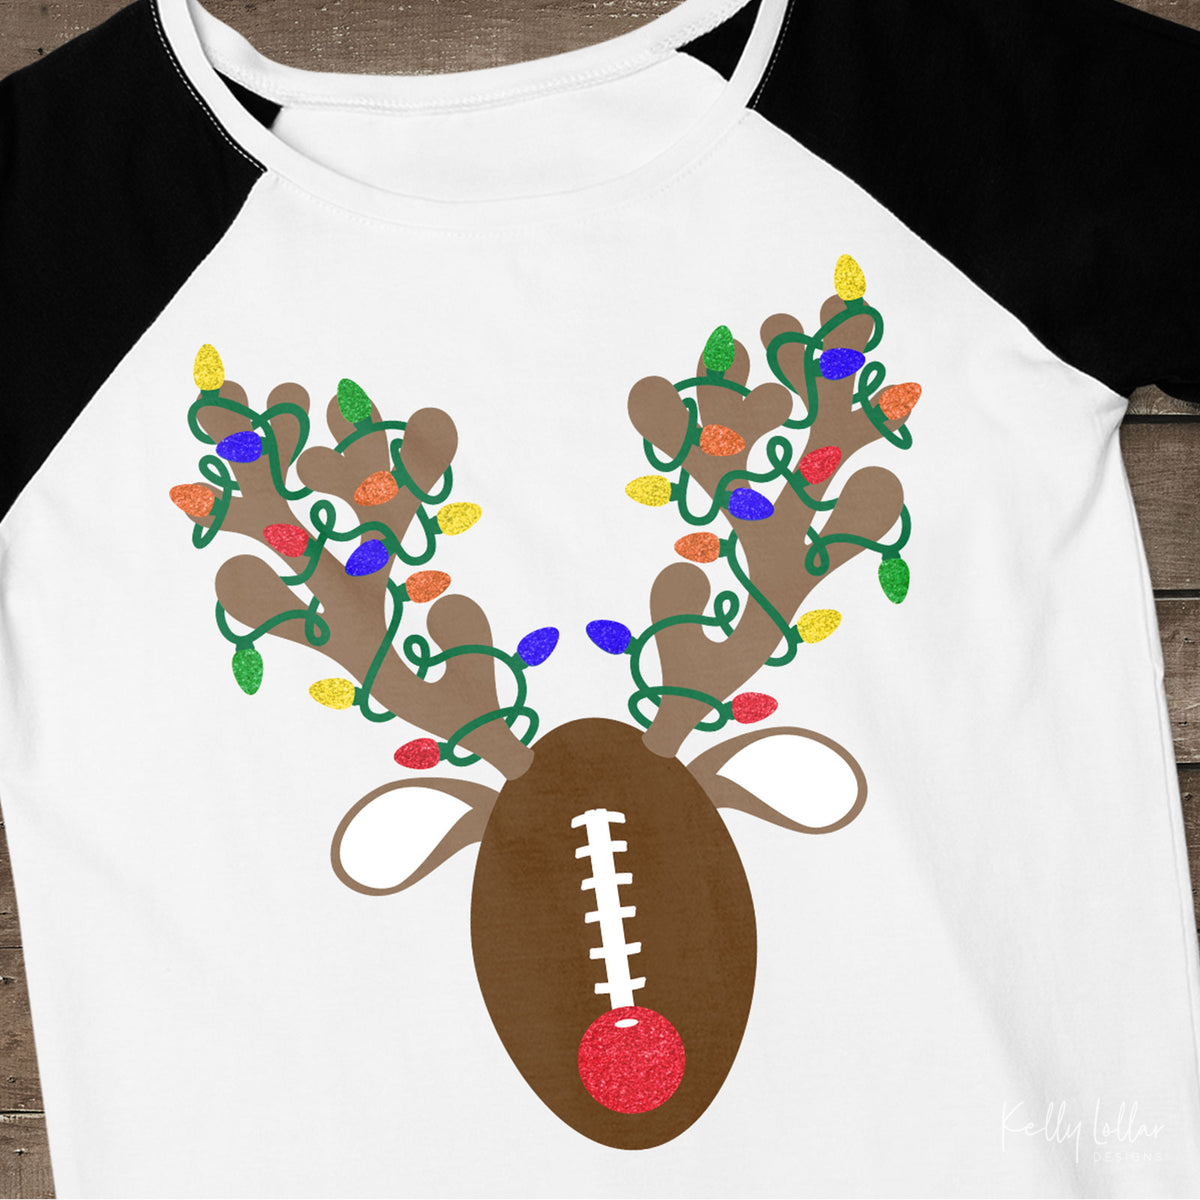 Christmas Light Wrapped Reindeer Antlers and Ears on a Football for Holiday Shirts and Decor | SVG DXF PNG Cut Files